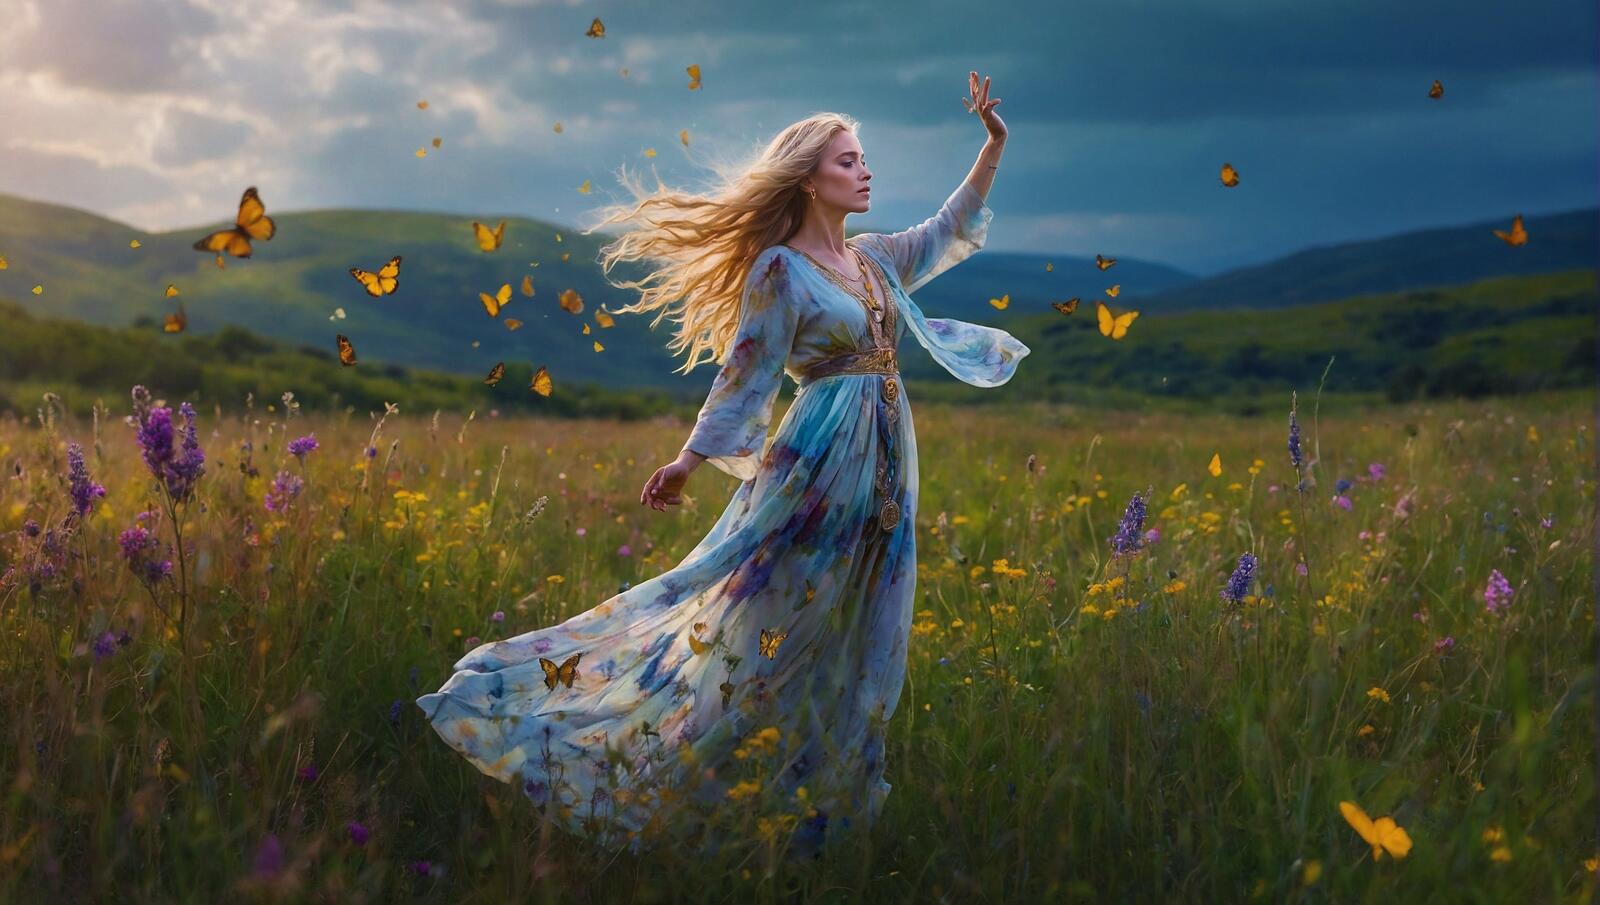 Free photo A woman dressed in blue is in the middle of a field with many flowers